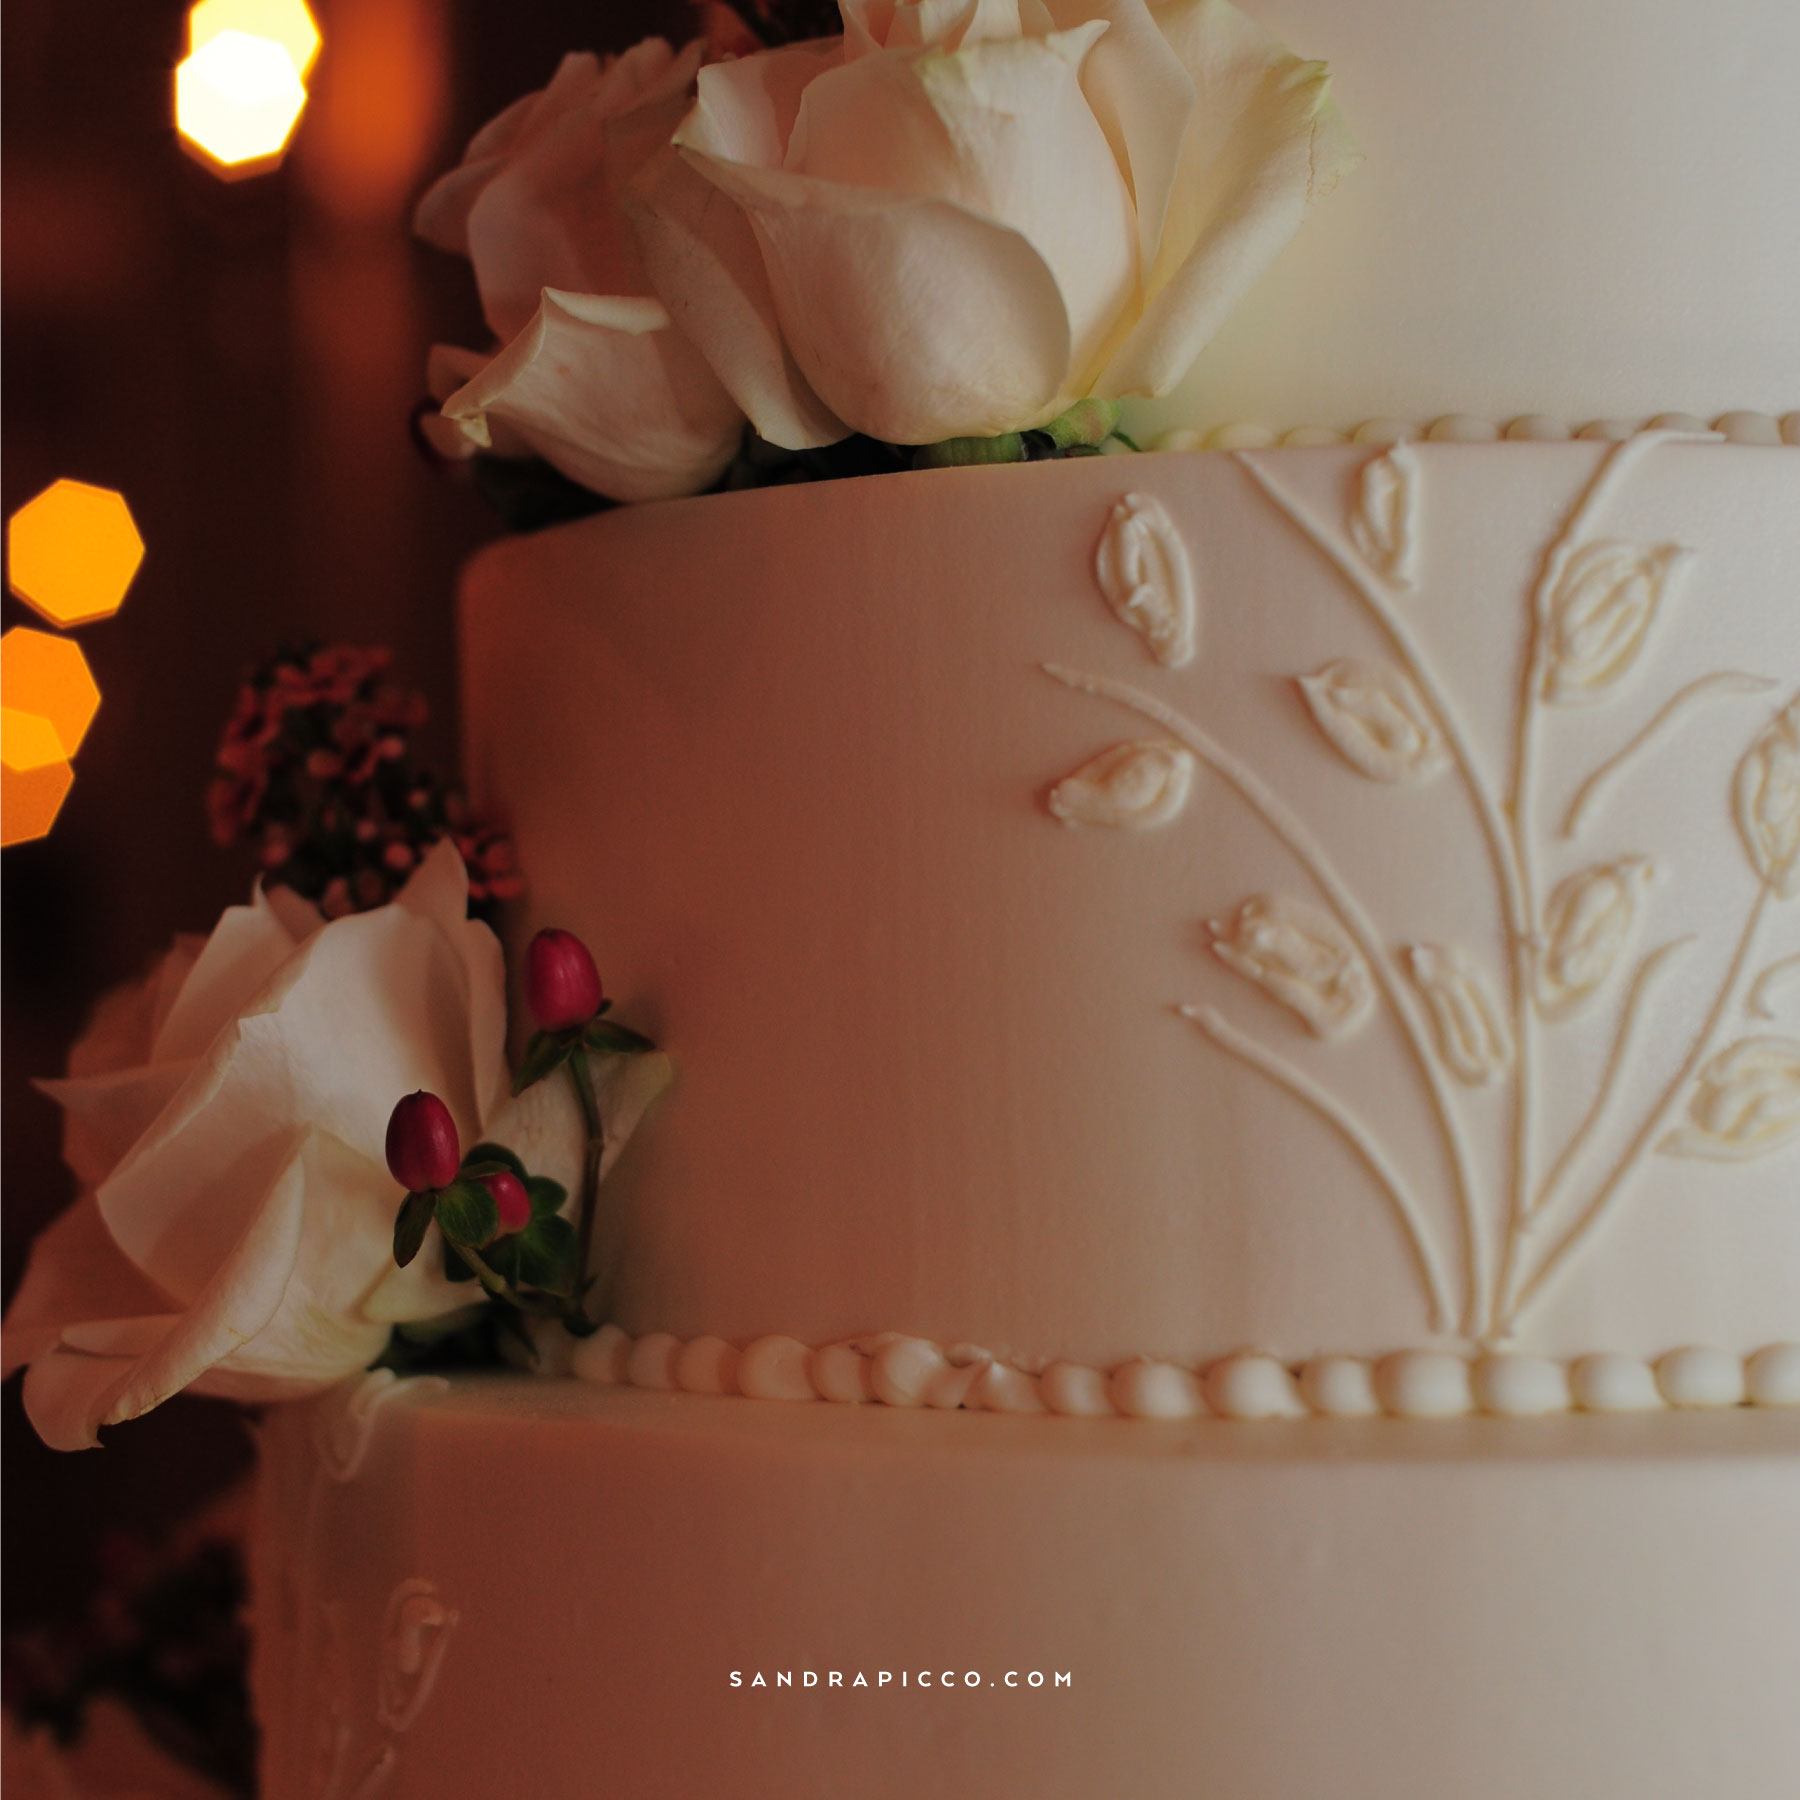 Wedding Cake with Autumn Leaves Details